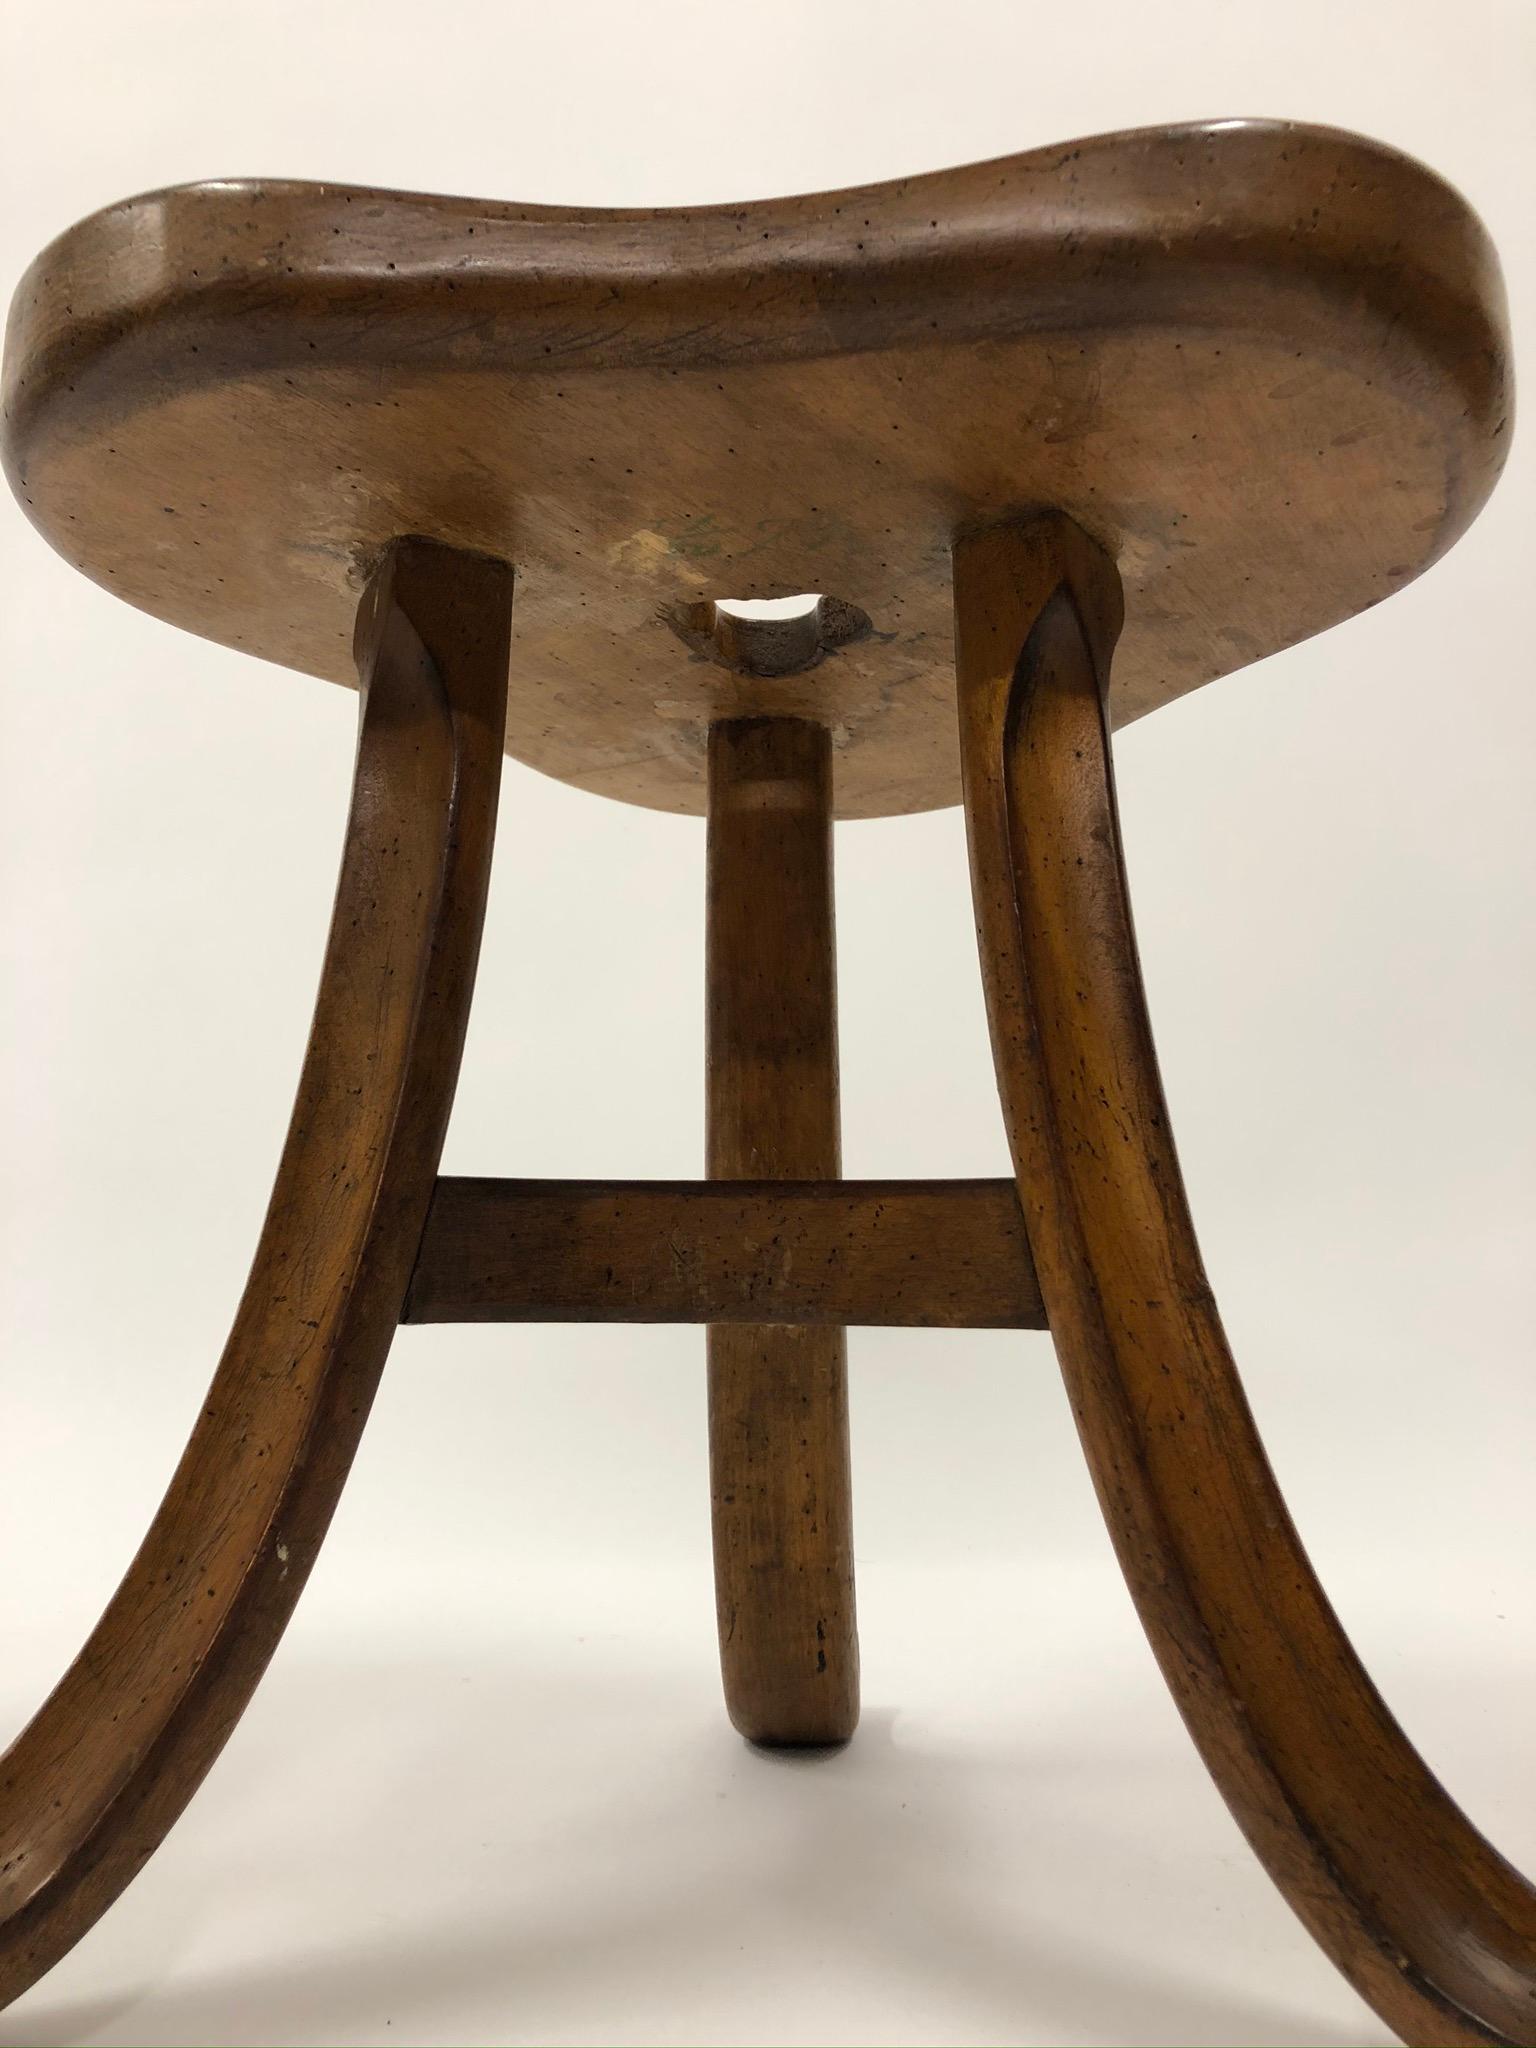 Antique trefoil top mounted stool on three splayed legs around one triangular shelf in an ale finish.

Property from esteemed interior designer Juan Montoya. Juan Montoya is one of the most acclaimed and prolific interior designers in the world